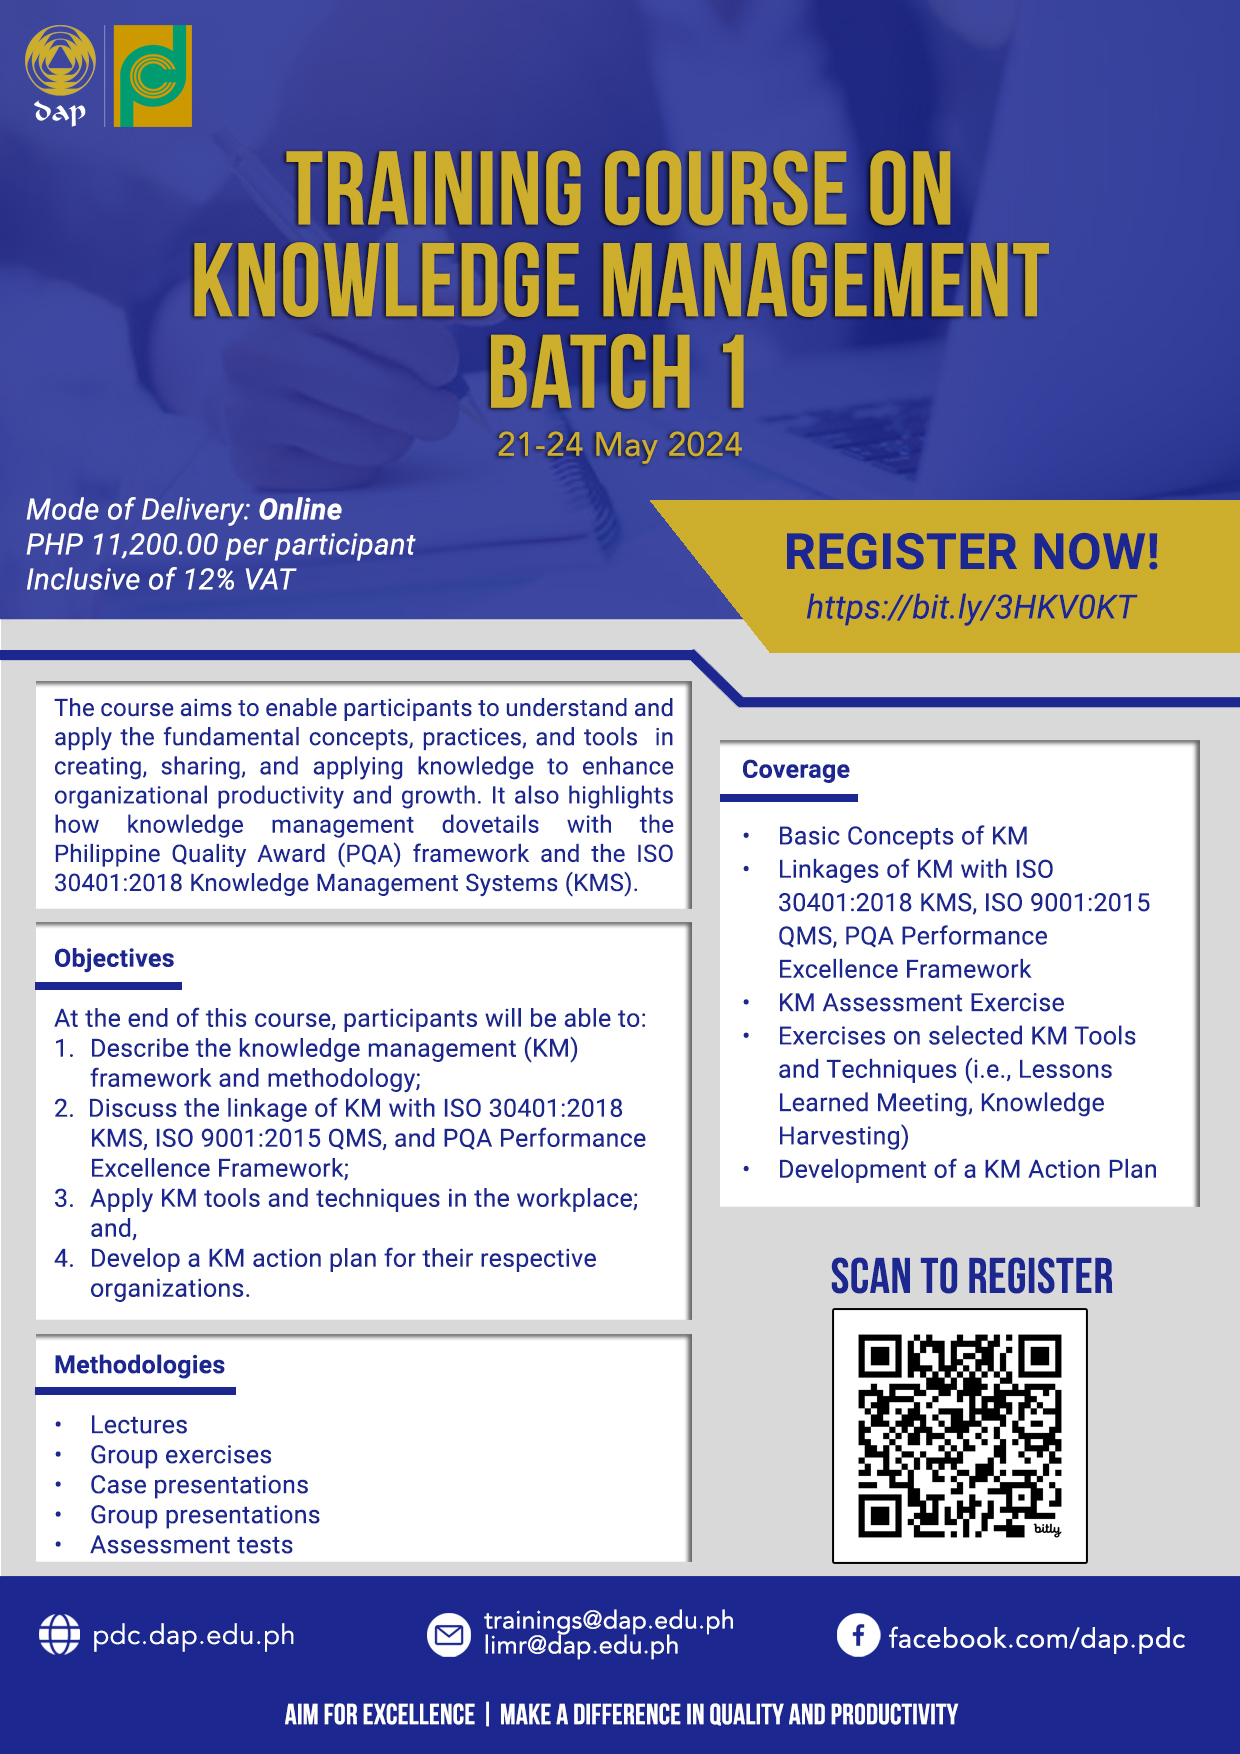 Training Course on Knowledge Management (Batch 1) - Online